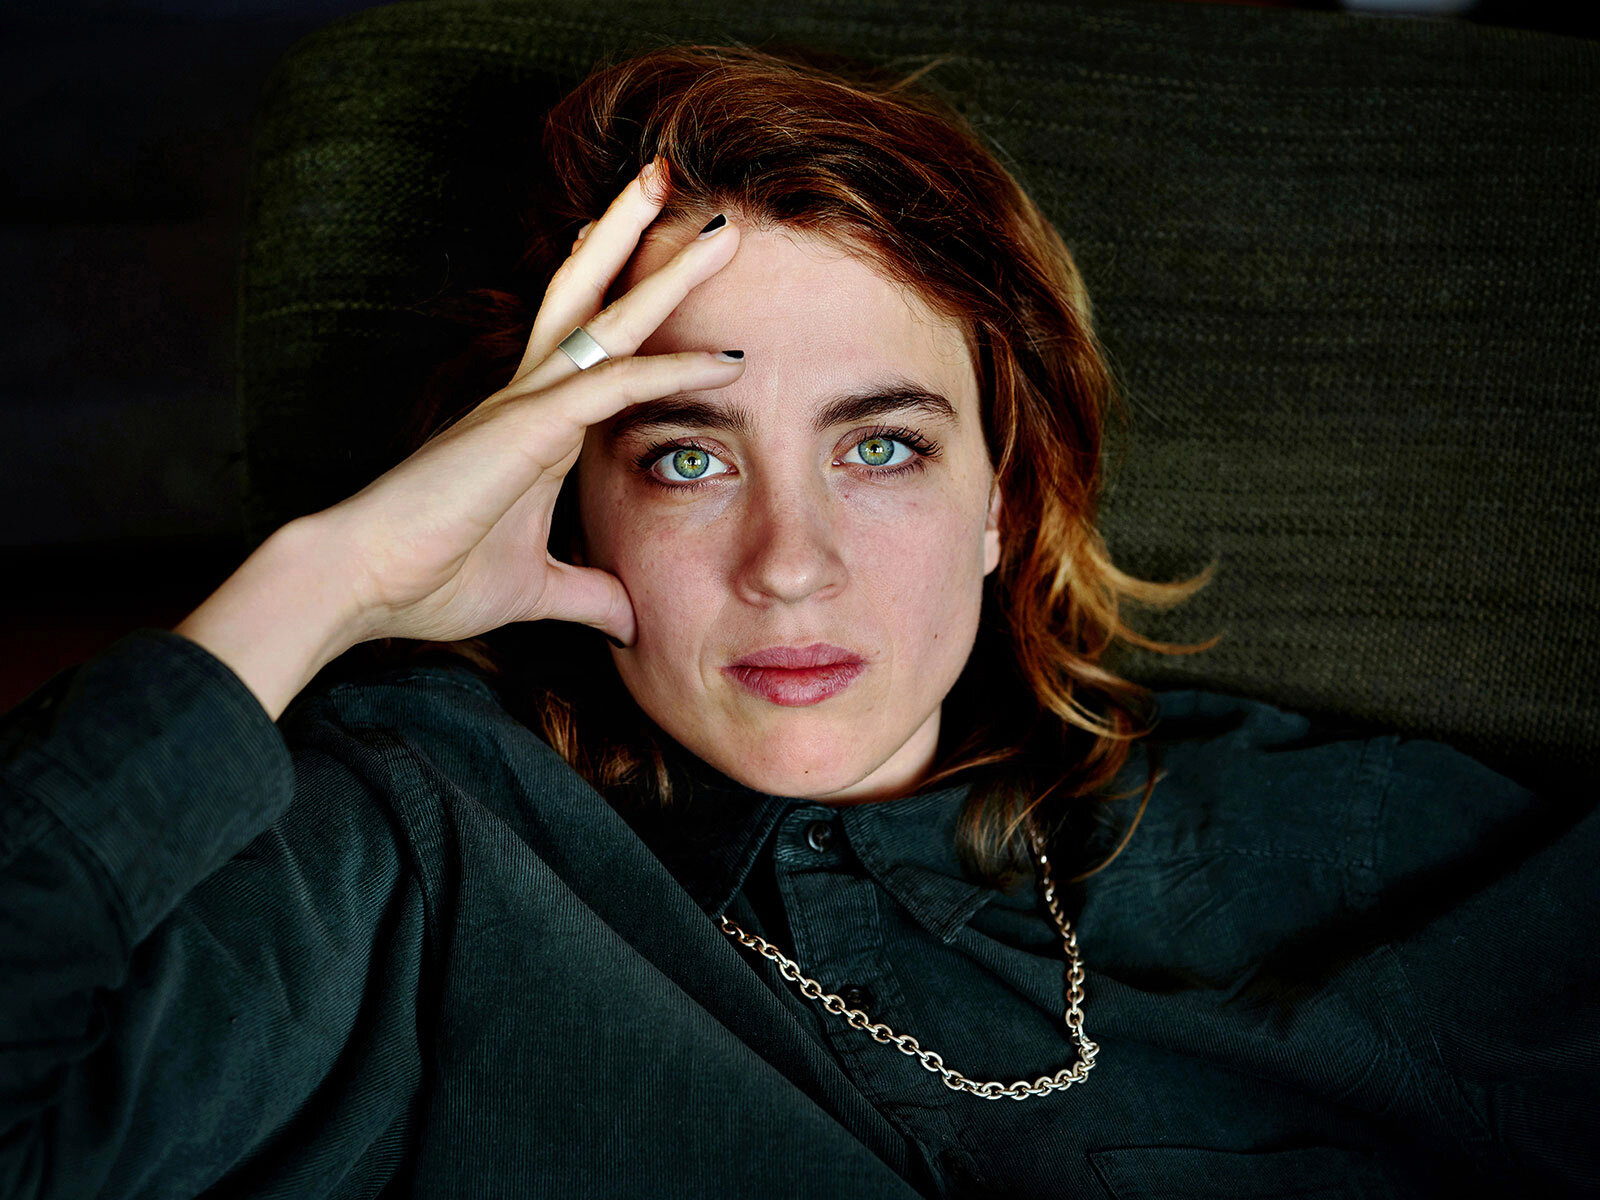 Adèle Haenel for The New York Times, #metoo